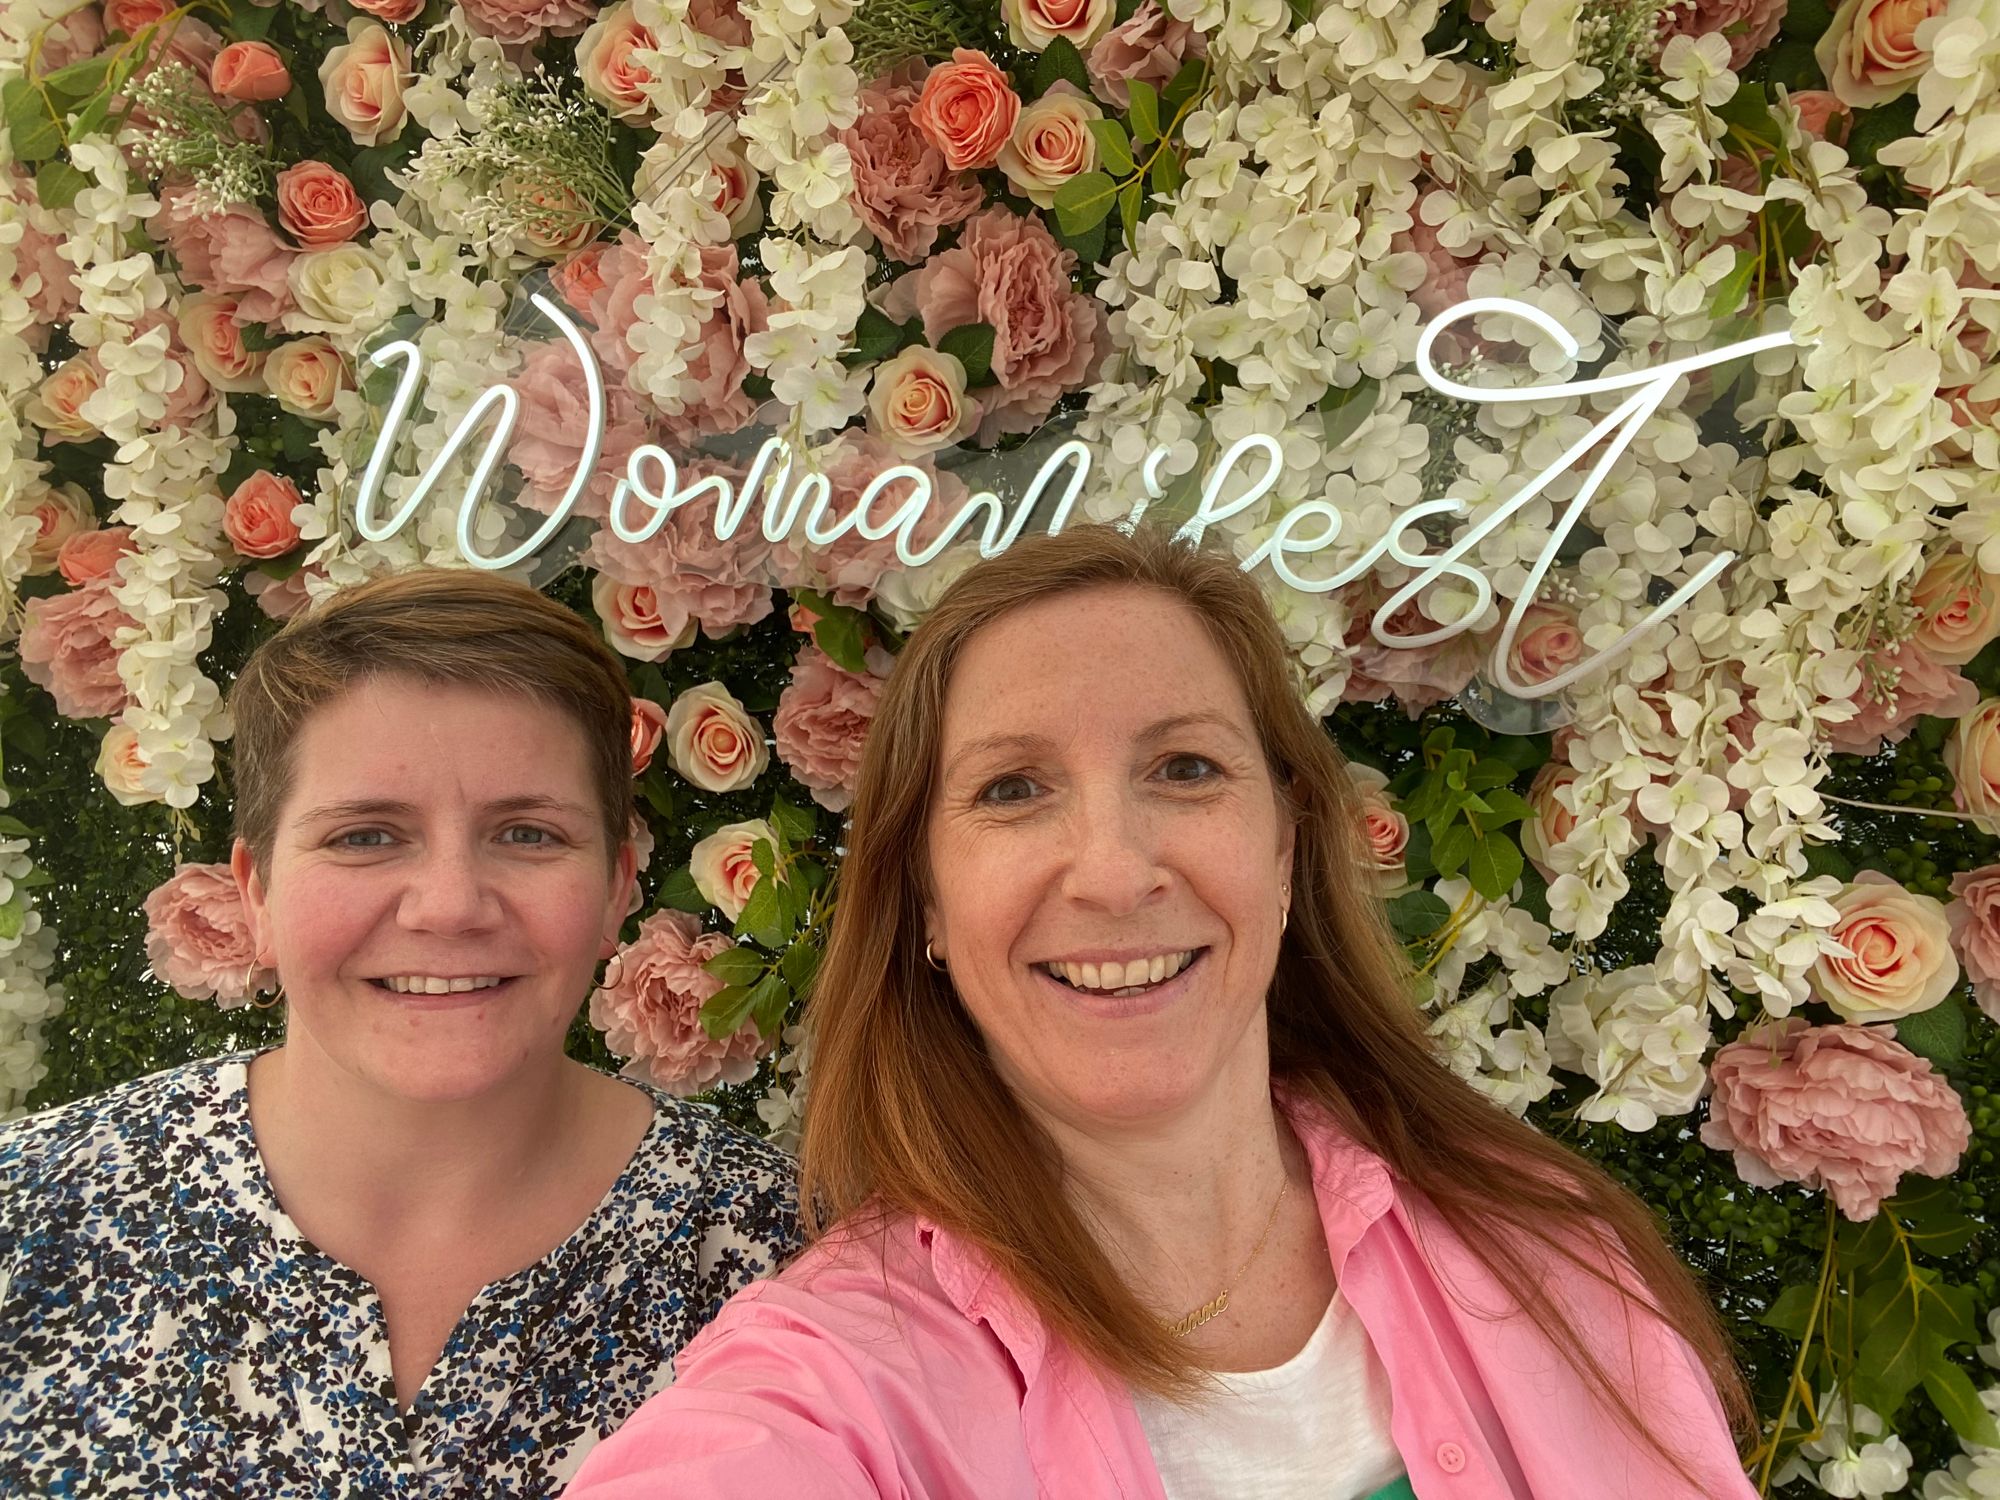 Maggie and Joanne standing in front of a flower wall with the Womanifest neon sign behind